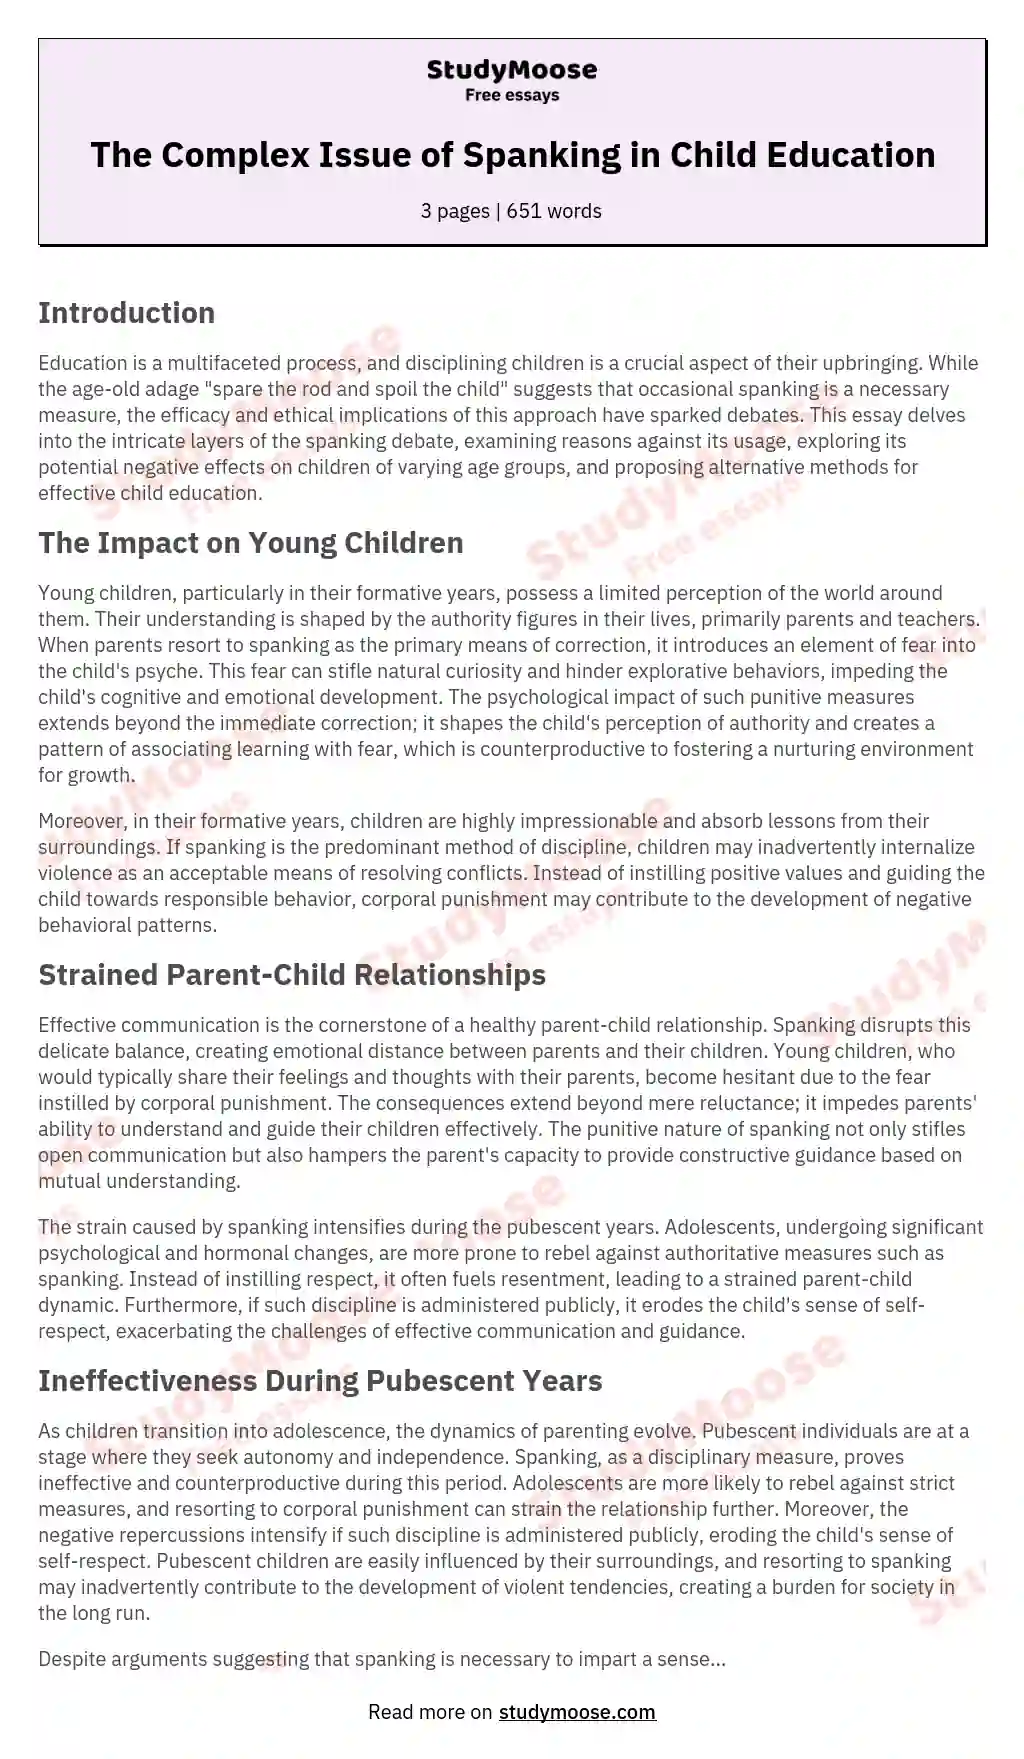 The Complex Issue of Spanking in Child Education essay